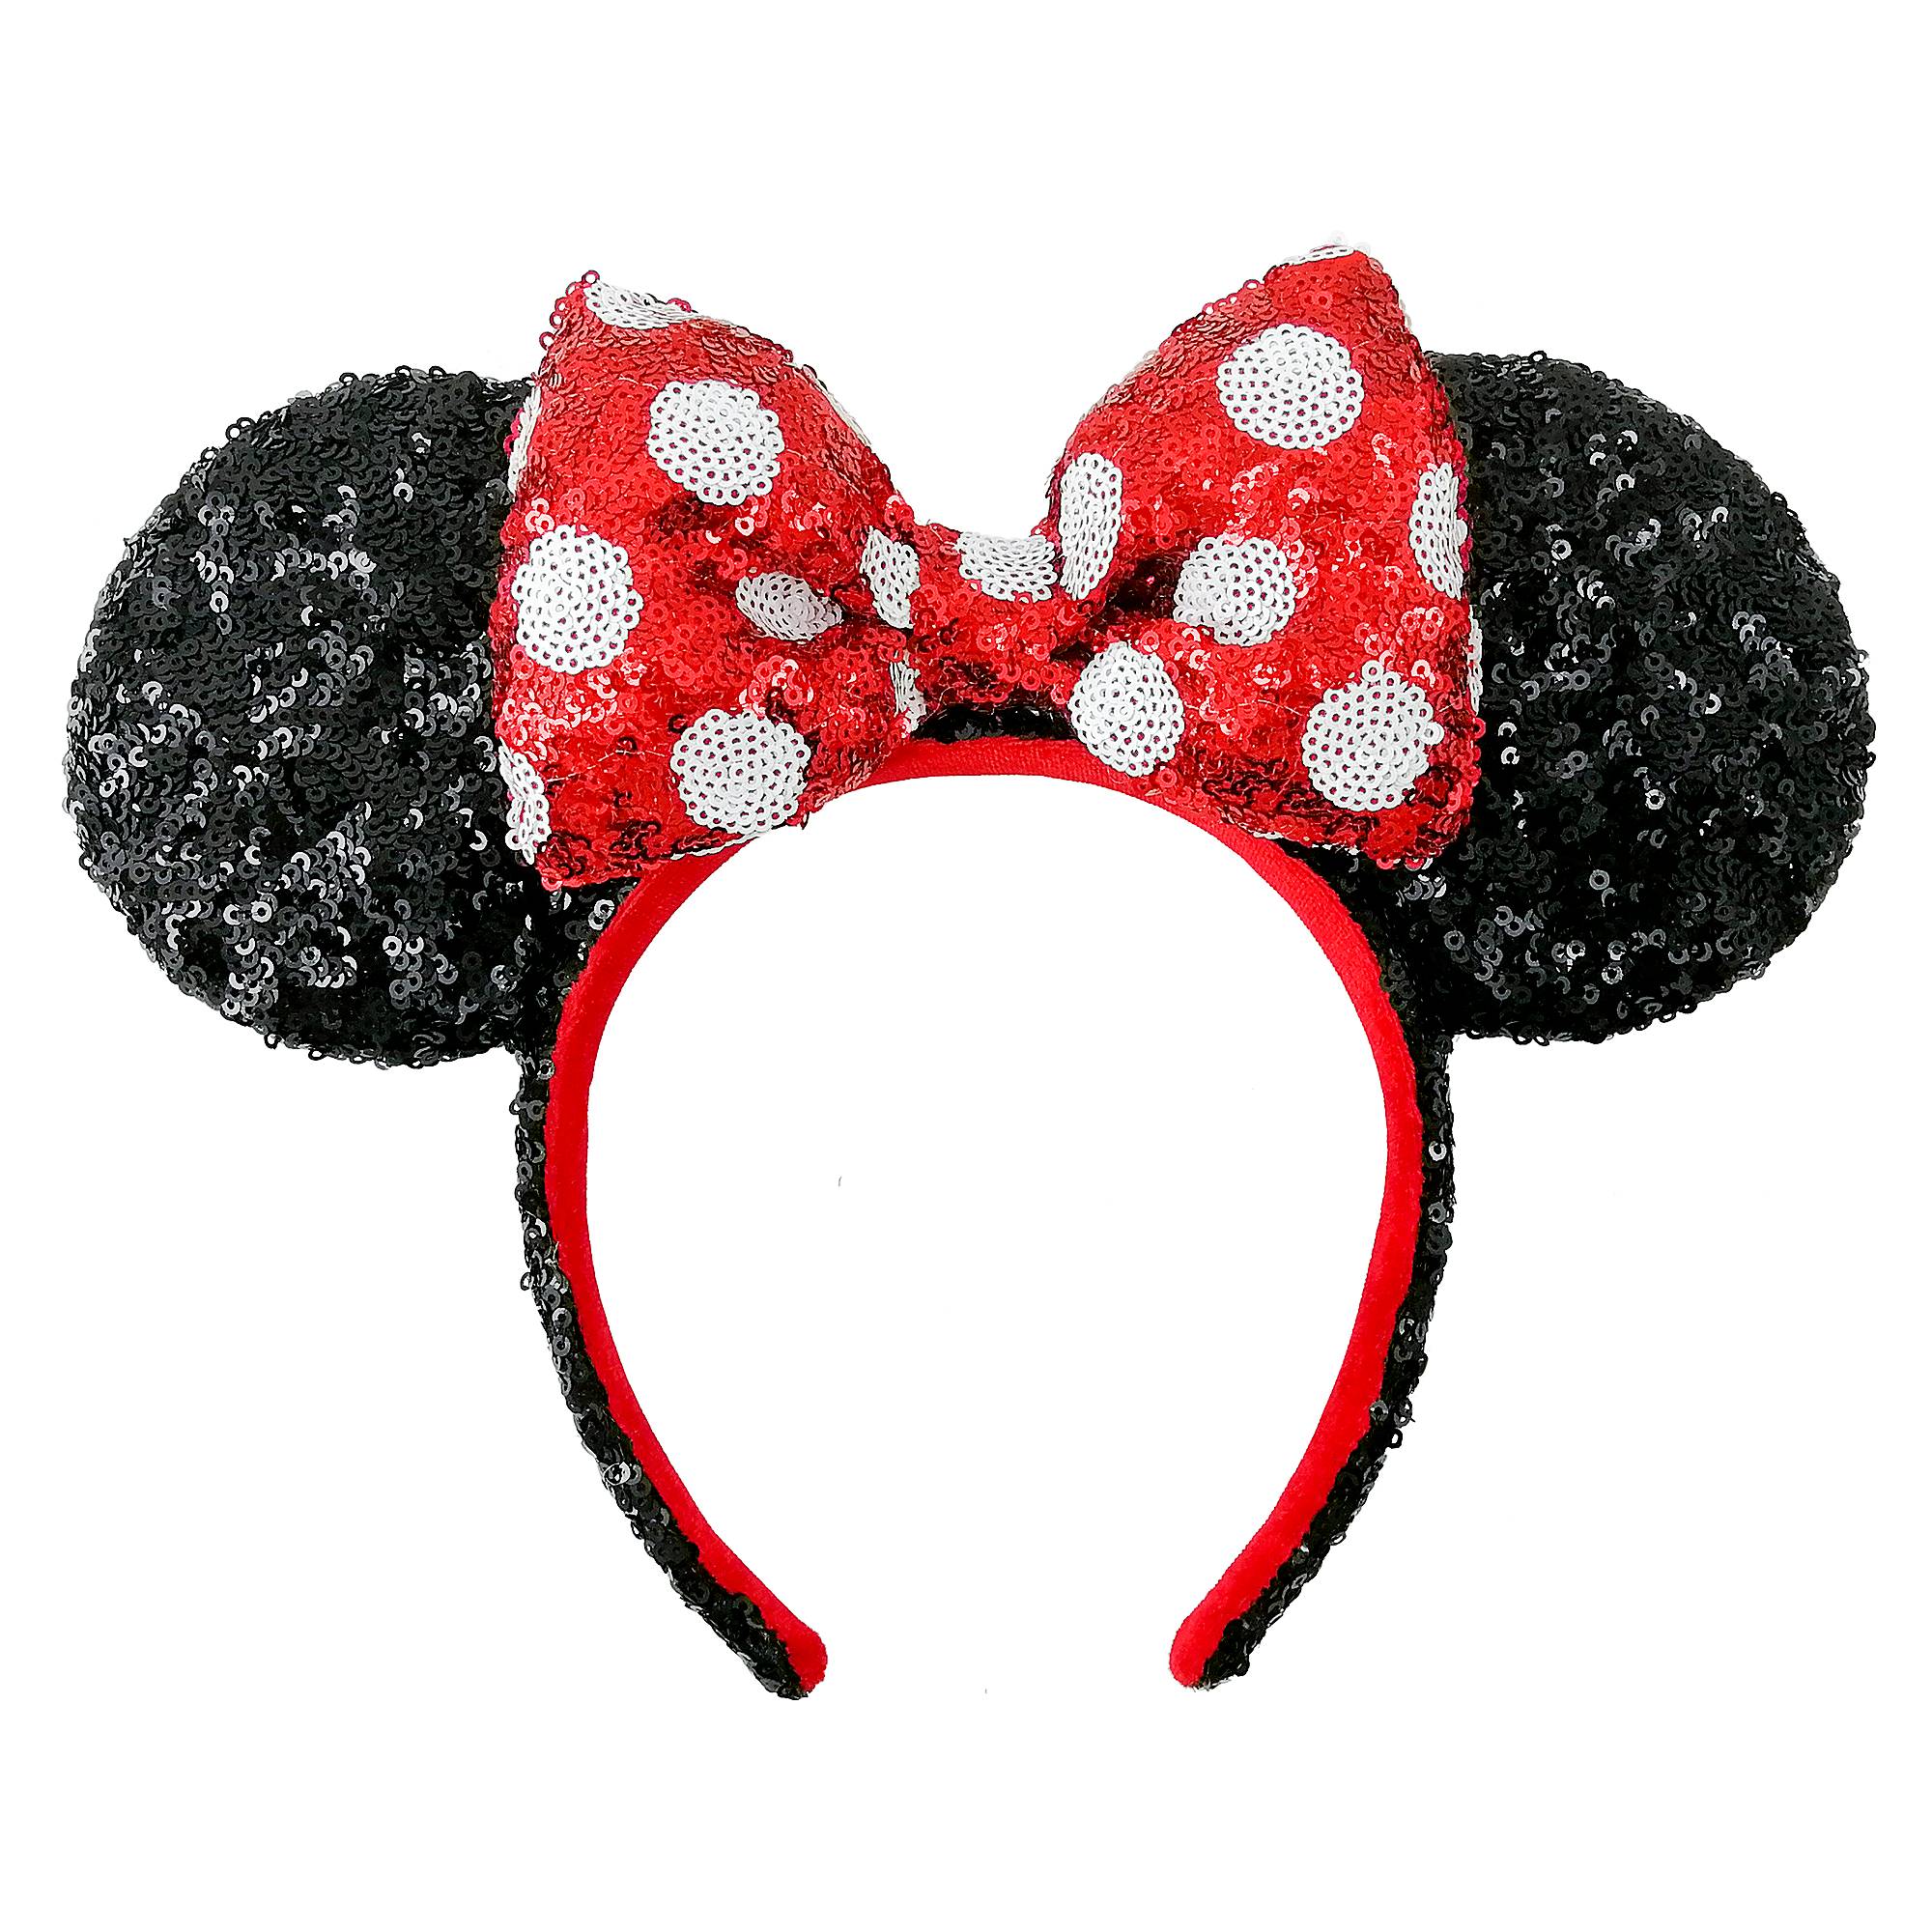 Minnie Mouse Sequined Ear Headband – Red & White Polka Dot image